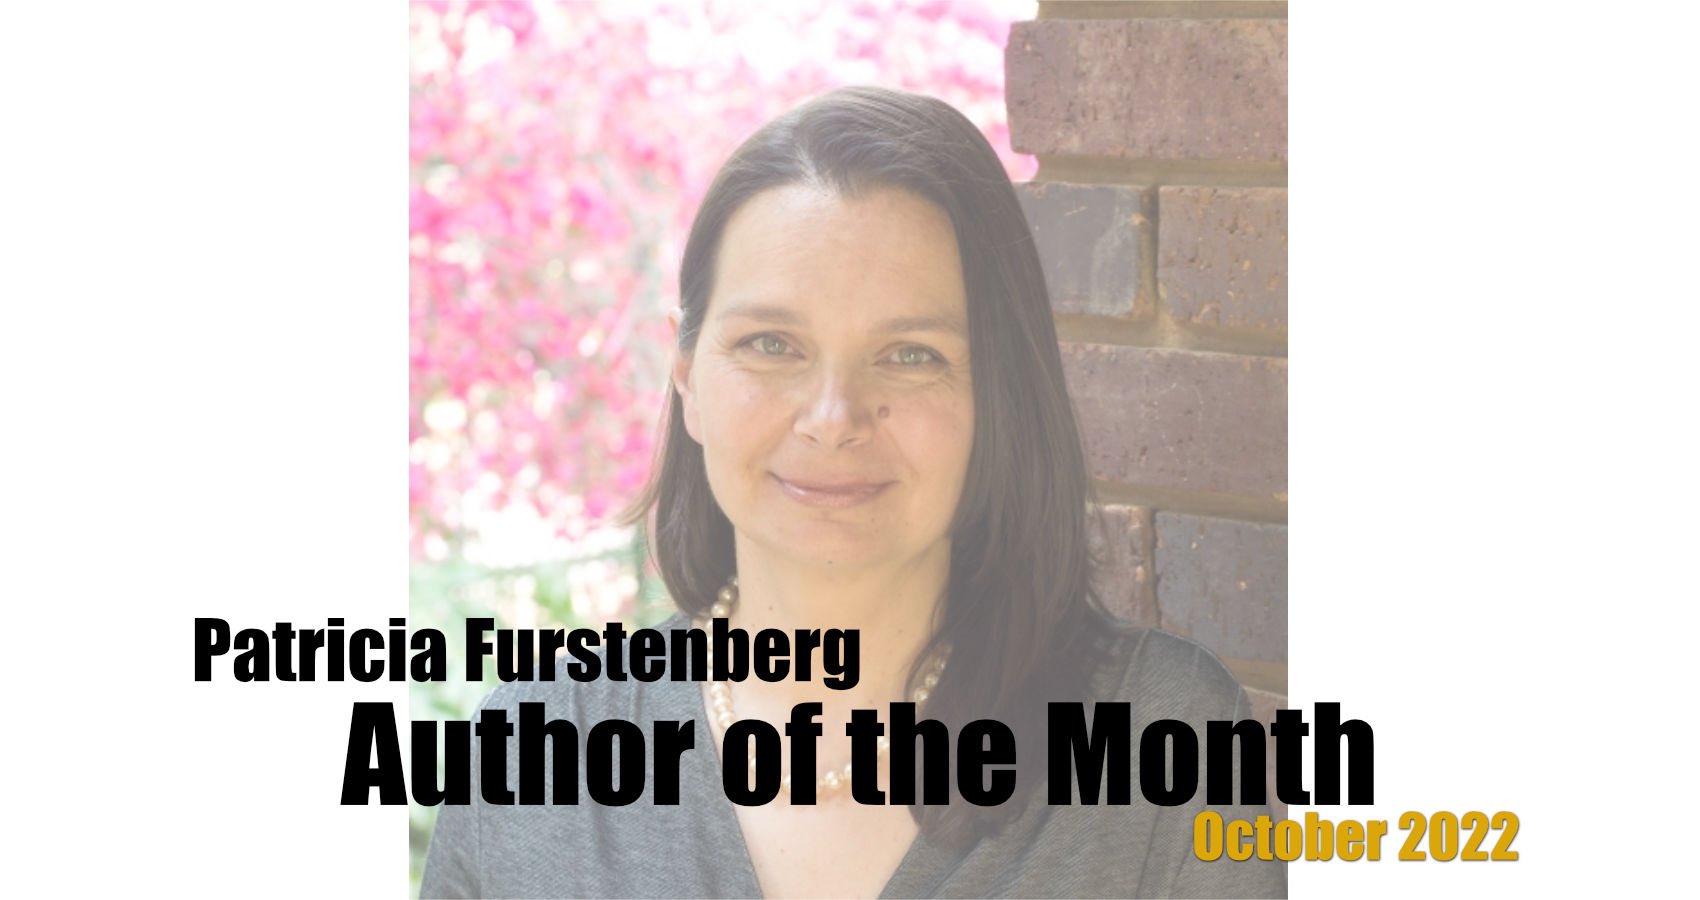 Patricia Furstenberg Spillwords Press Author of the Month November 2022